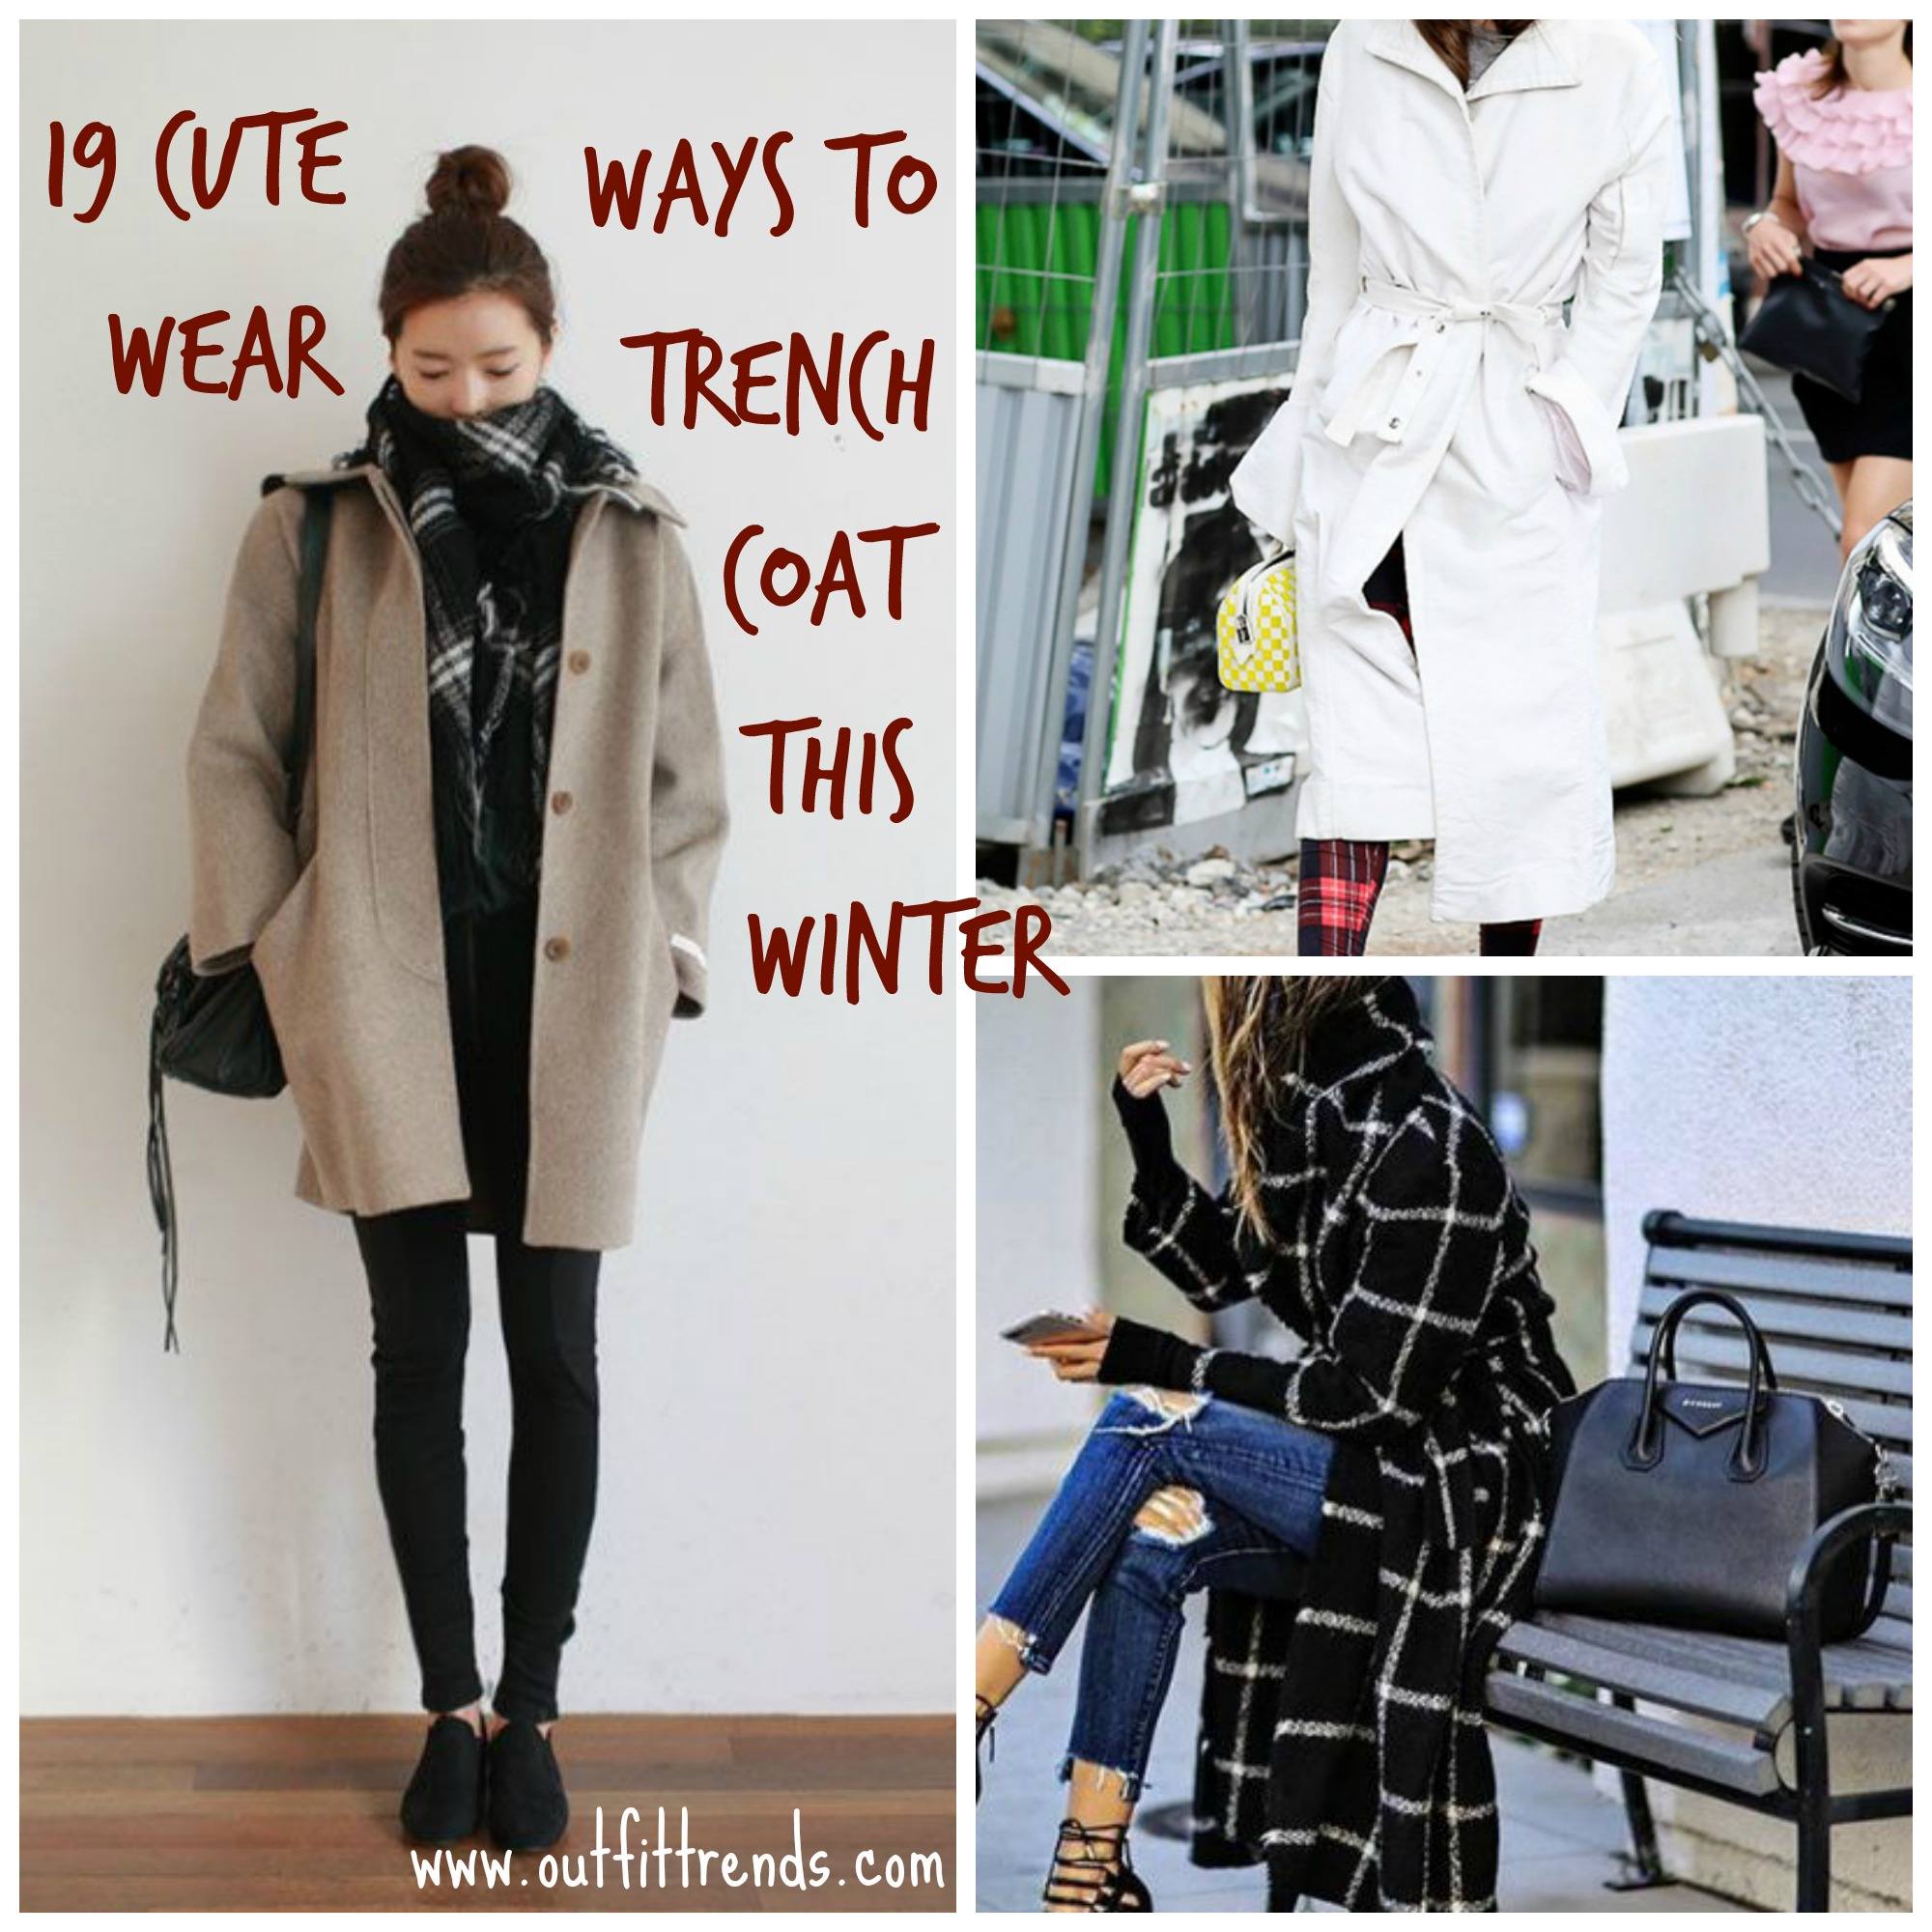 Trench Coat Outfits Women-19 Ways to Wear Trench Coats this Winter (6)